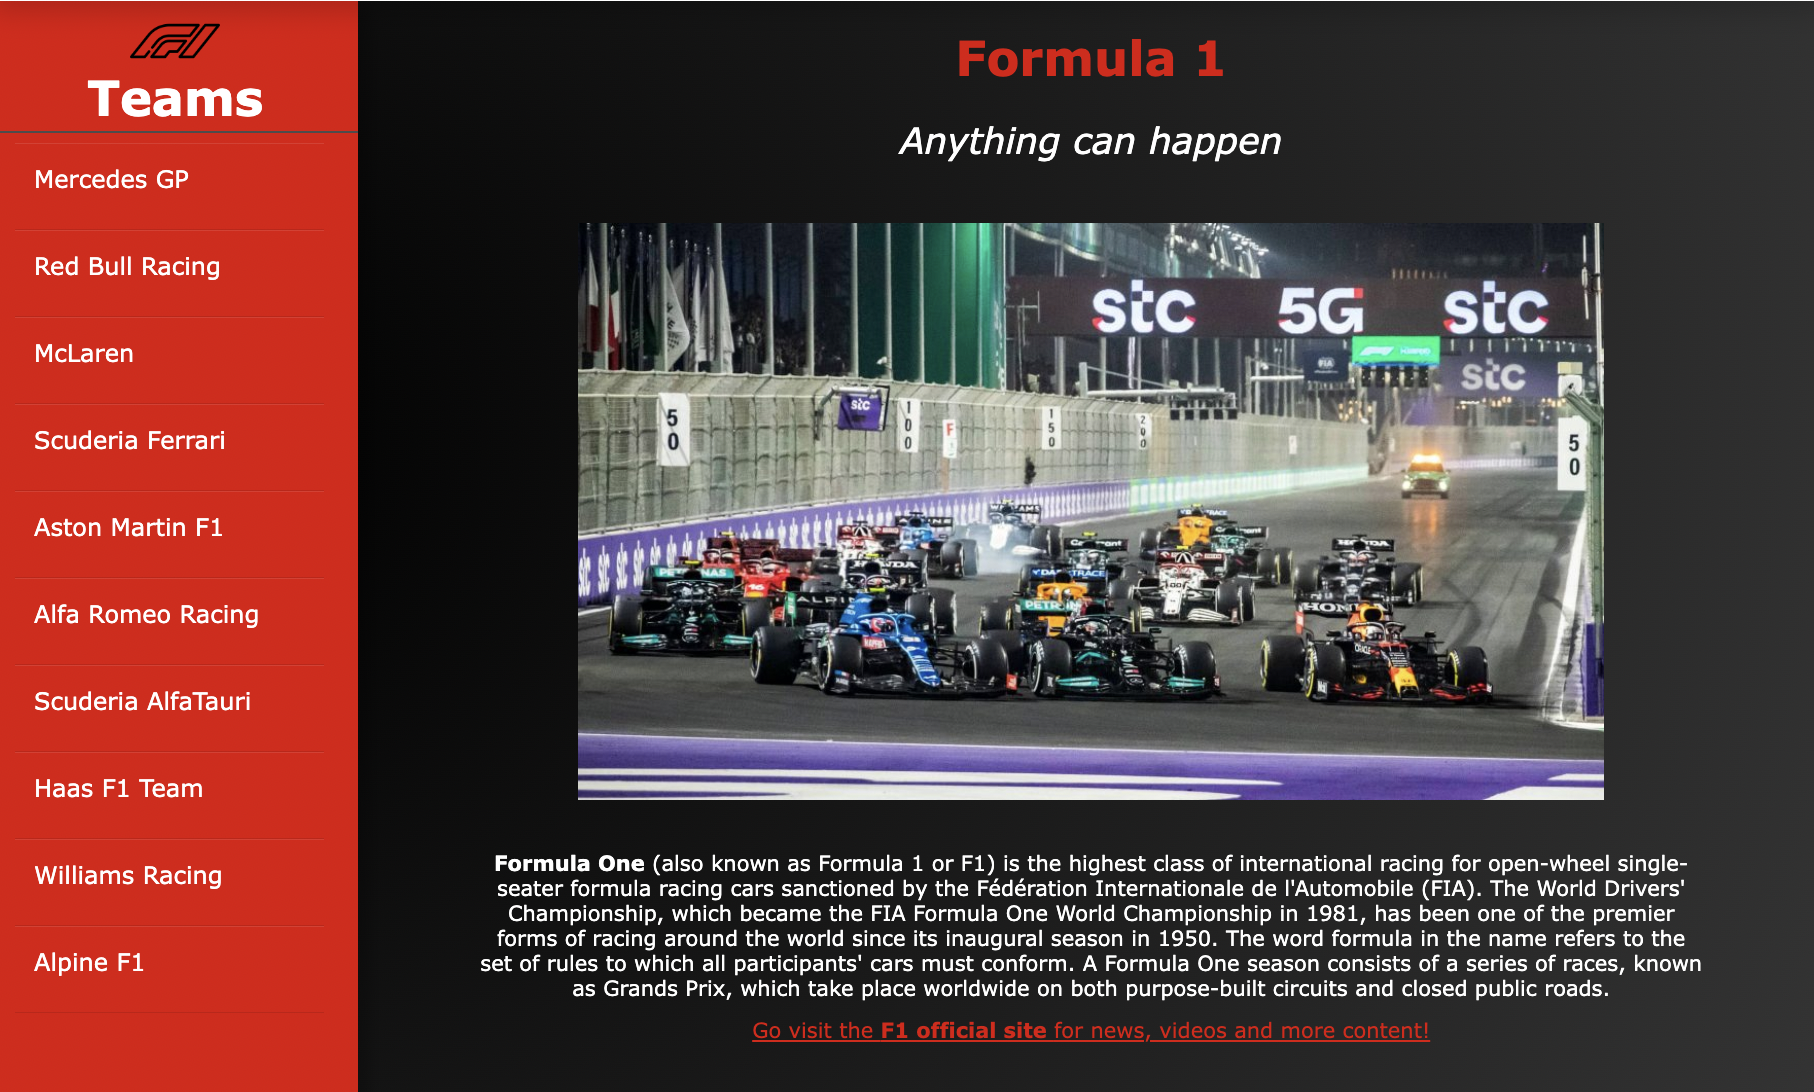 A preview of the Formula 1 project